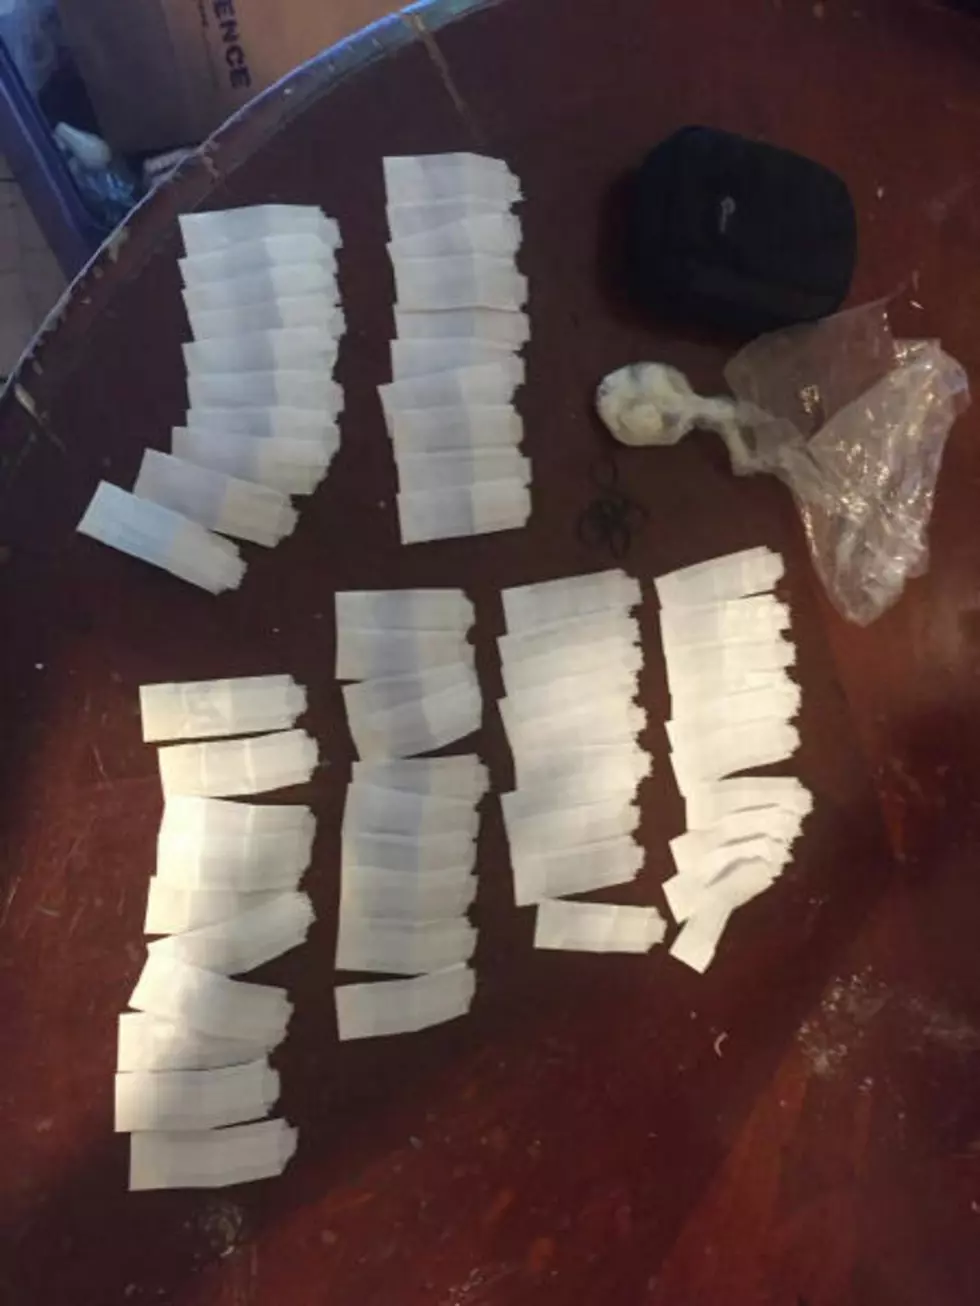 Police: Wanted Ulster County Man Found With 90 Decks Of Heroin, More